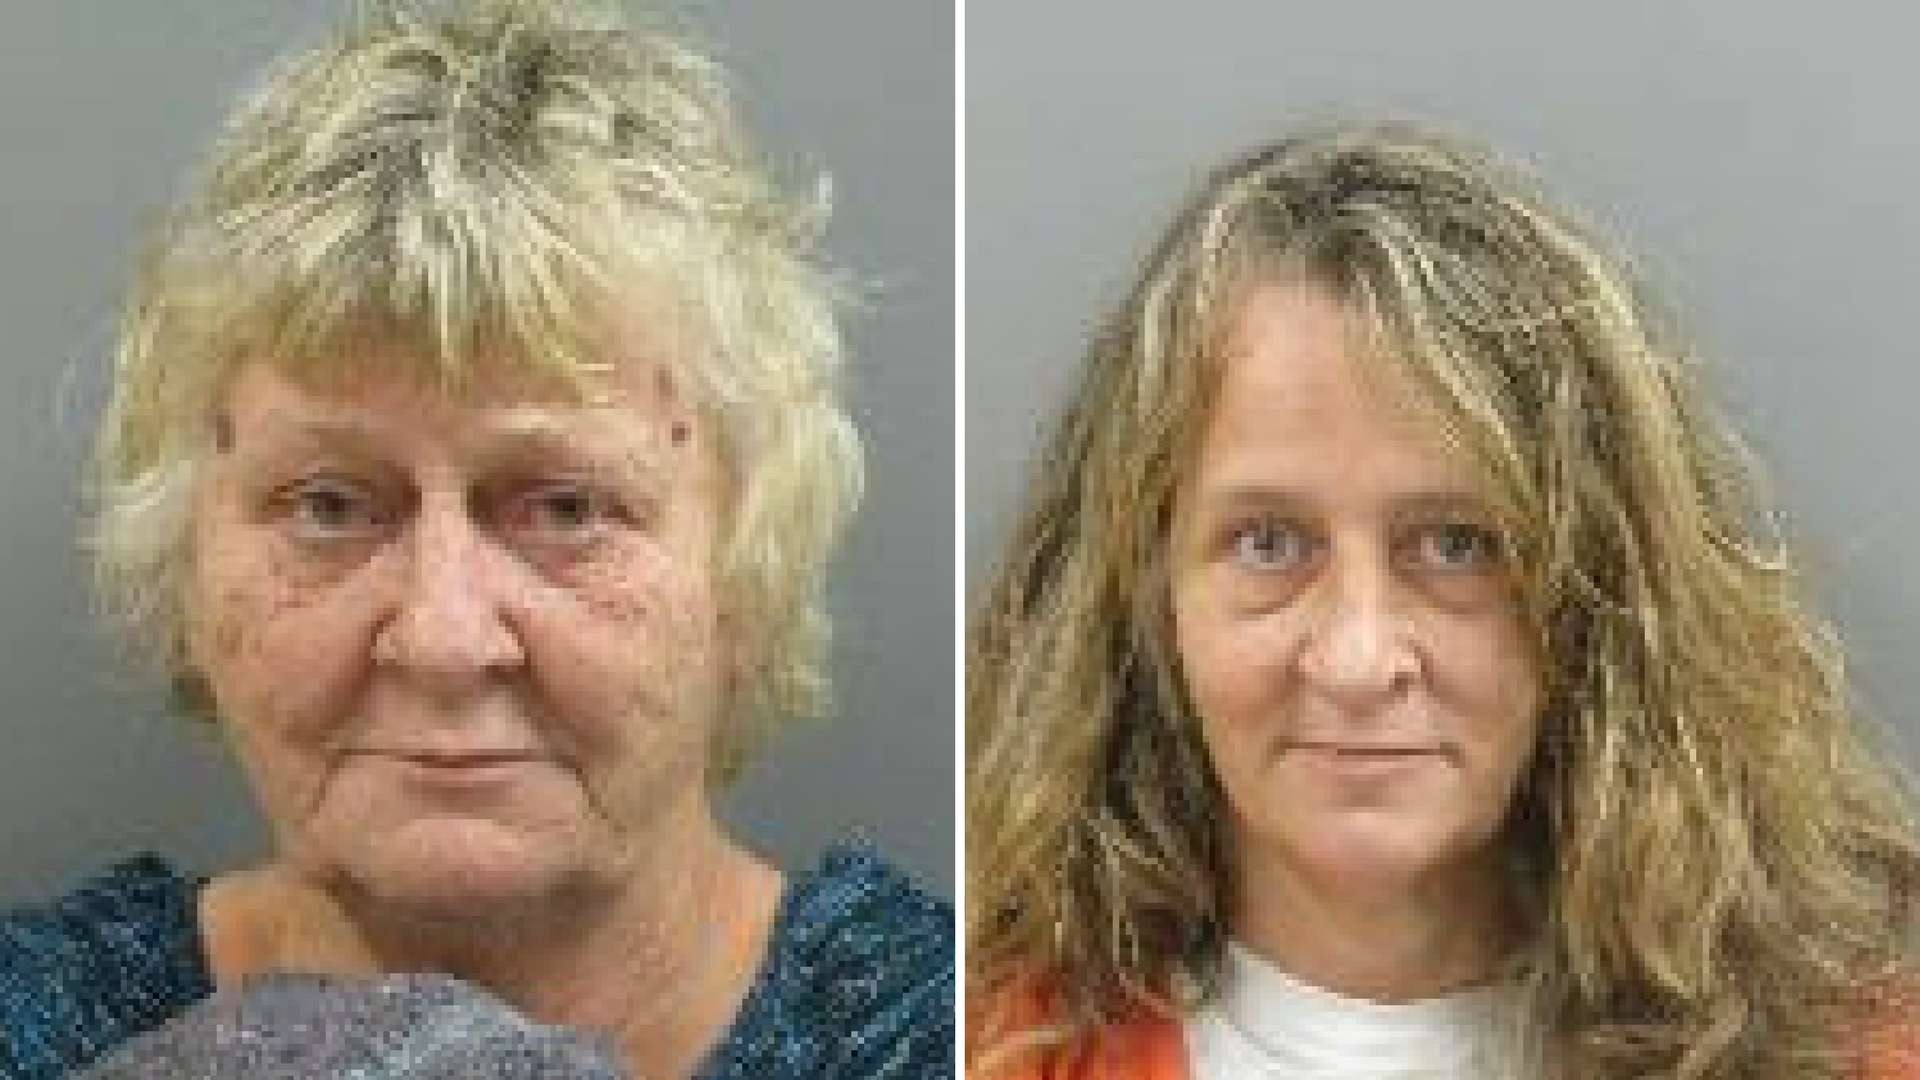 Mother Daughter Duo Arrestedcharged With Selling Oxycodone In Maine